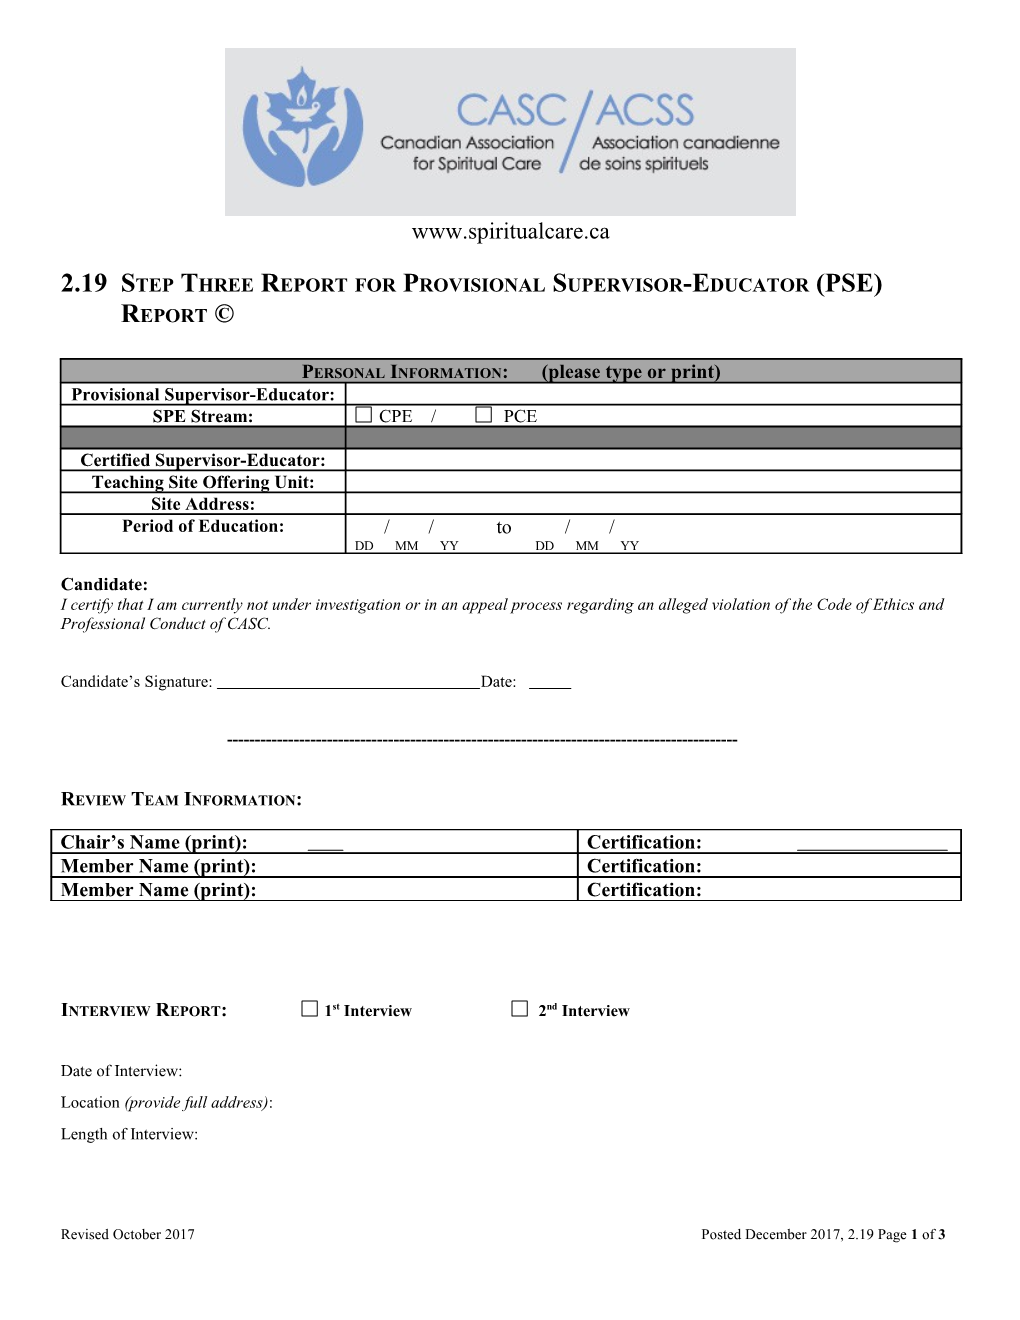 2.19 Step Three Report for Provisional Supervisor-Educator (PSE) Report